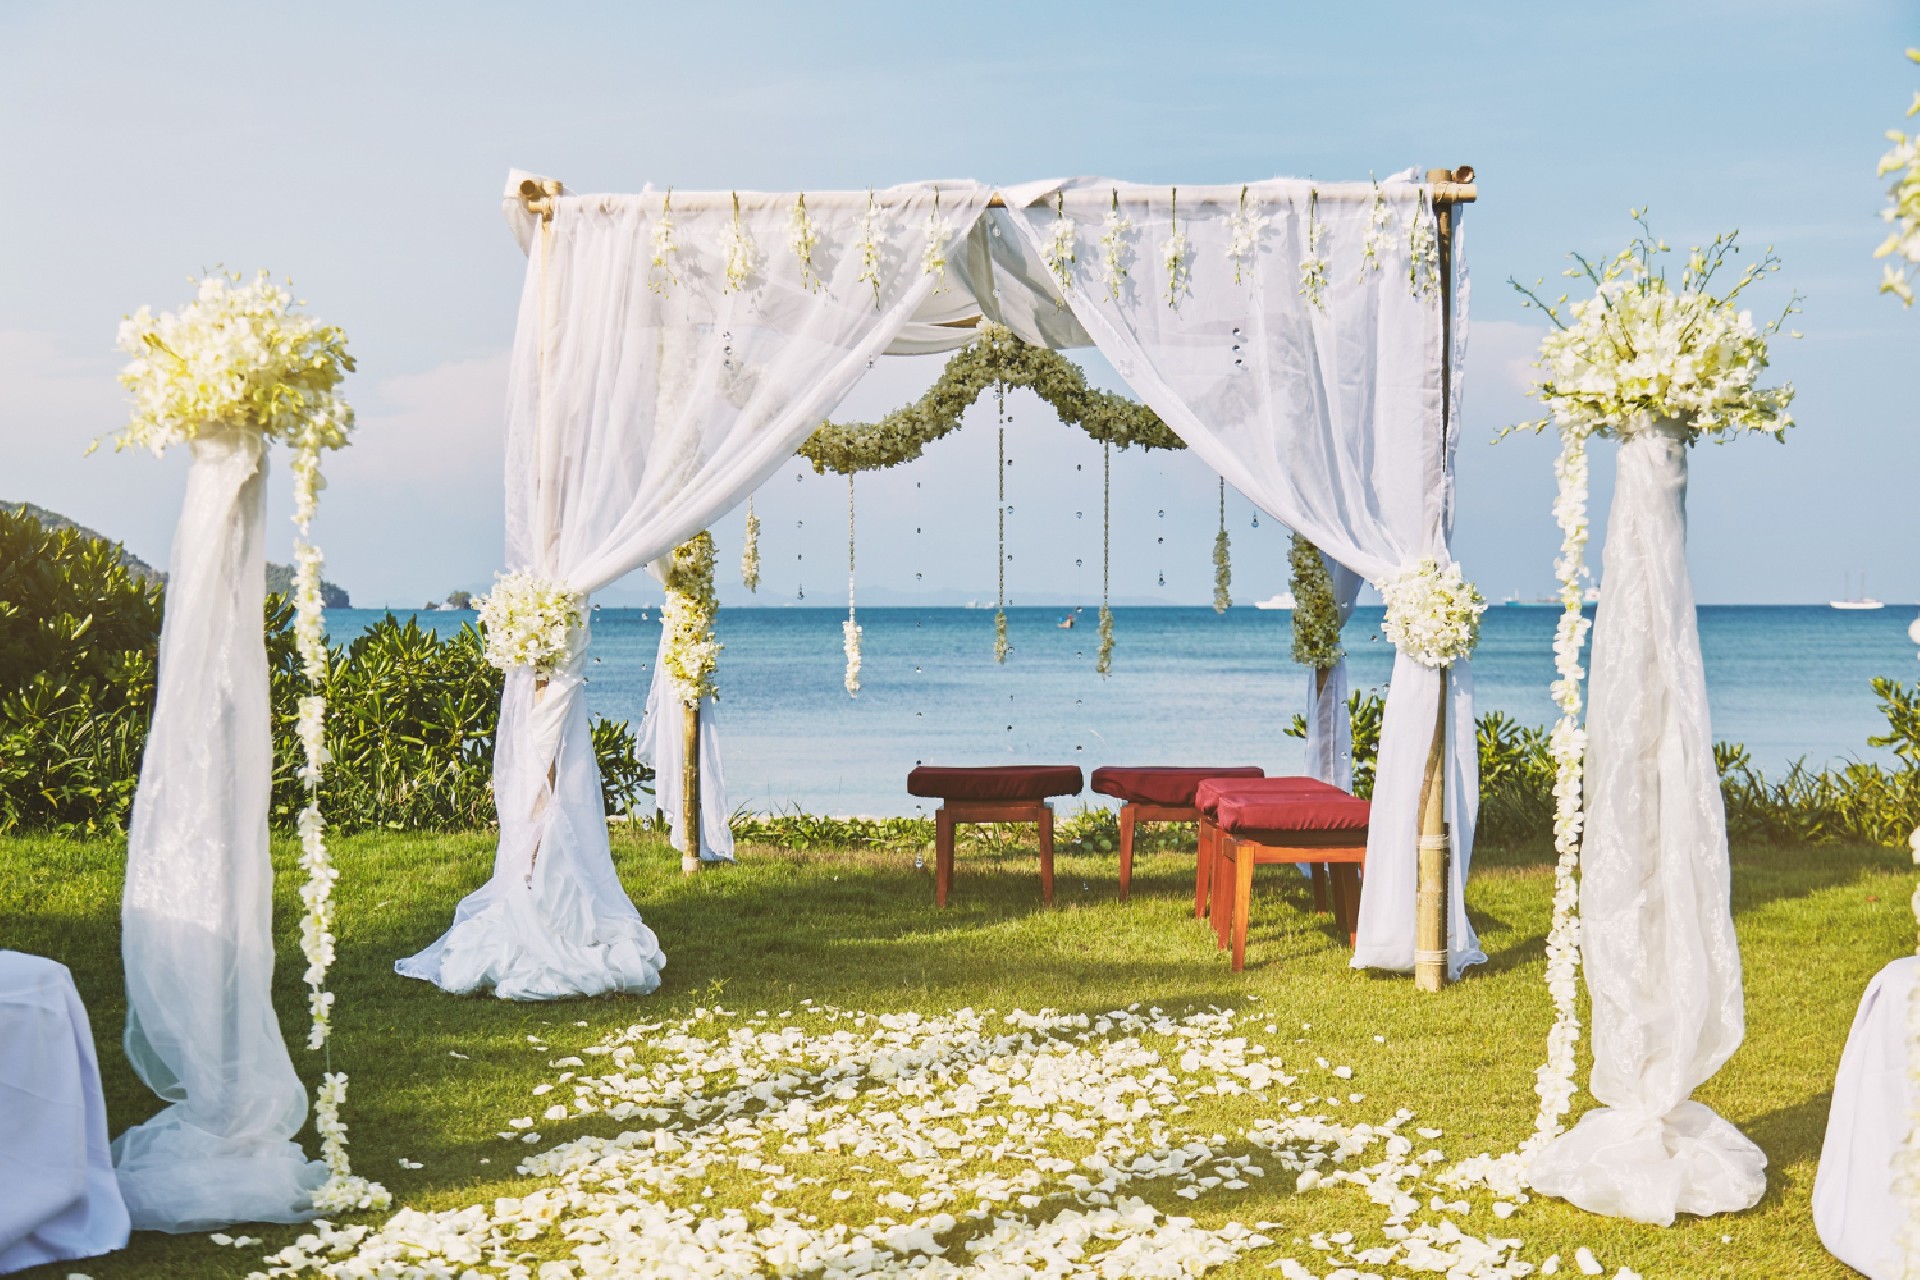 How to decorate a gazebo for a wedding ?